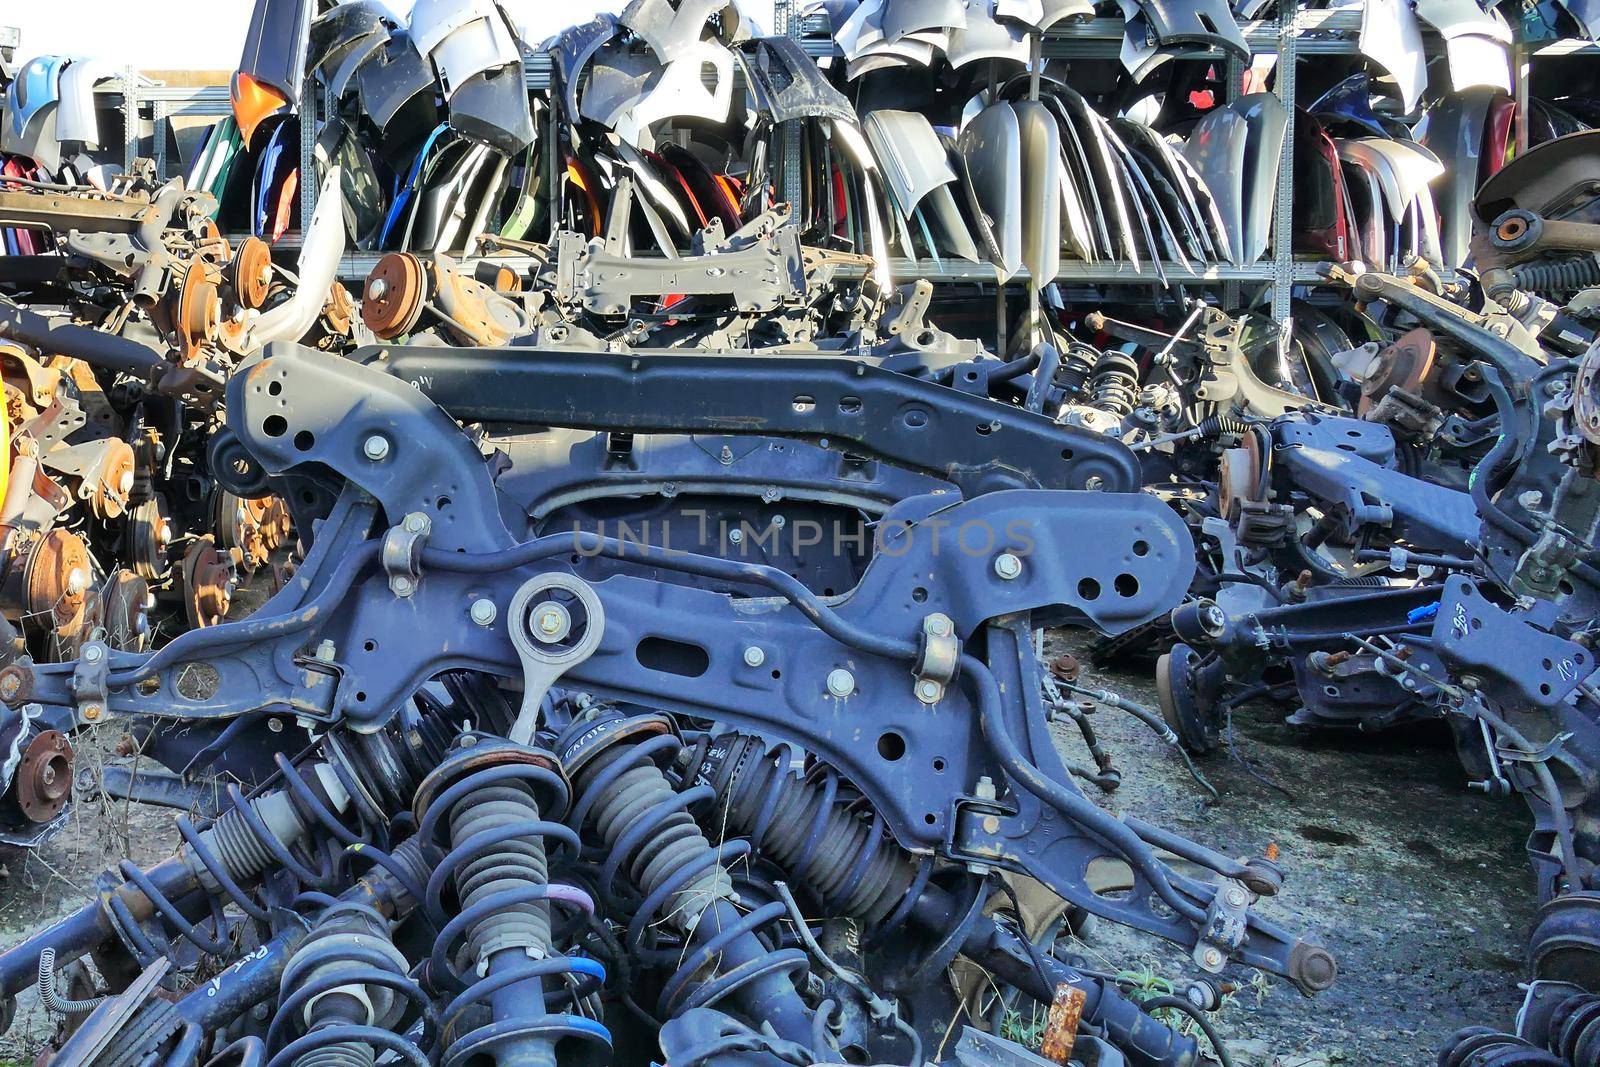 Disassembled polluting car parts accumulated for their reuse or disposal of metals and plastic by lemar